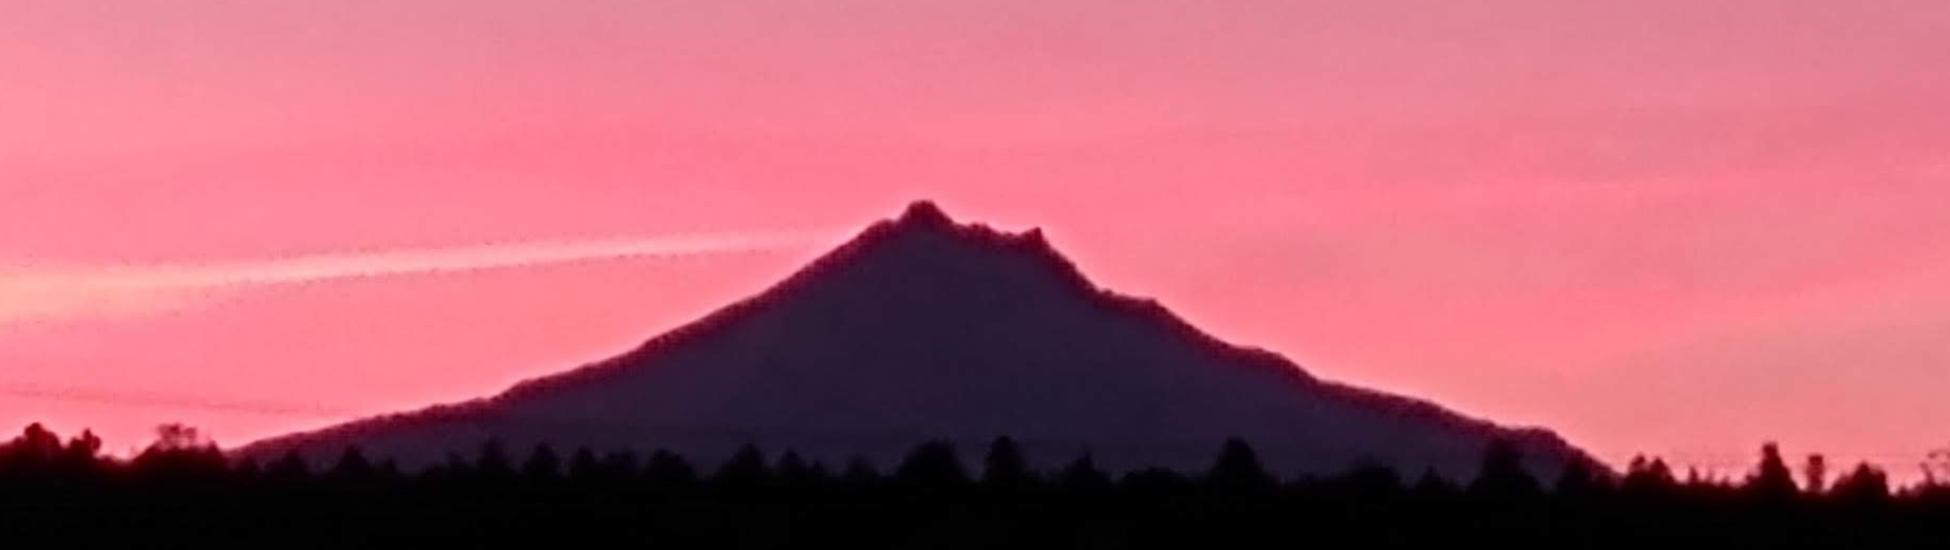 Mountain Silhouette at sunset